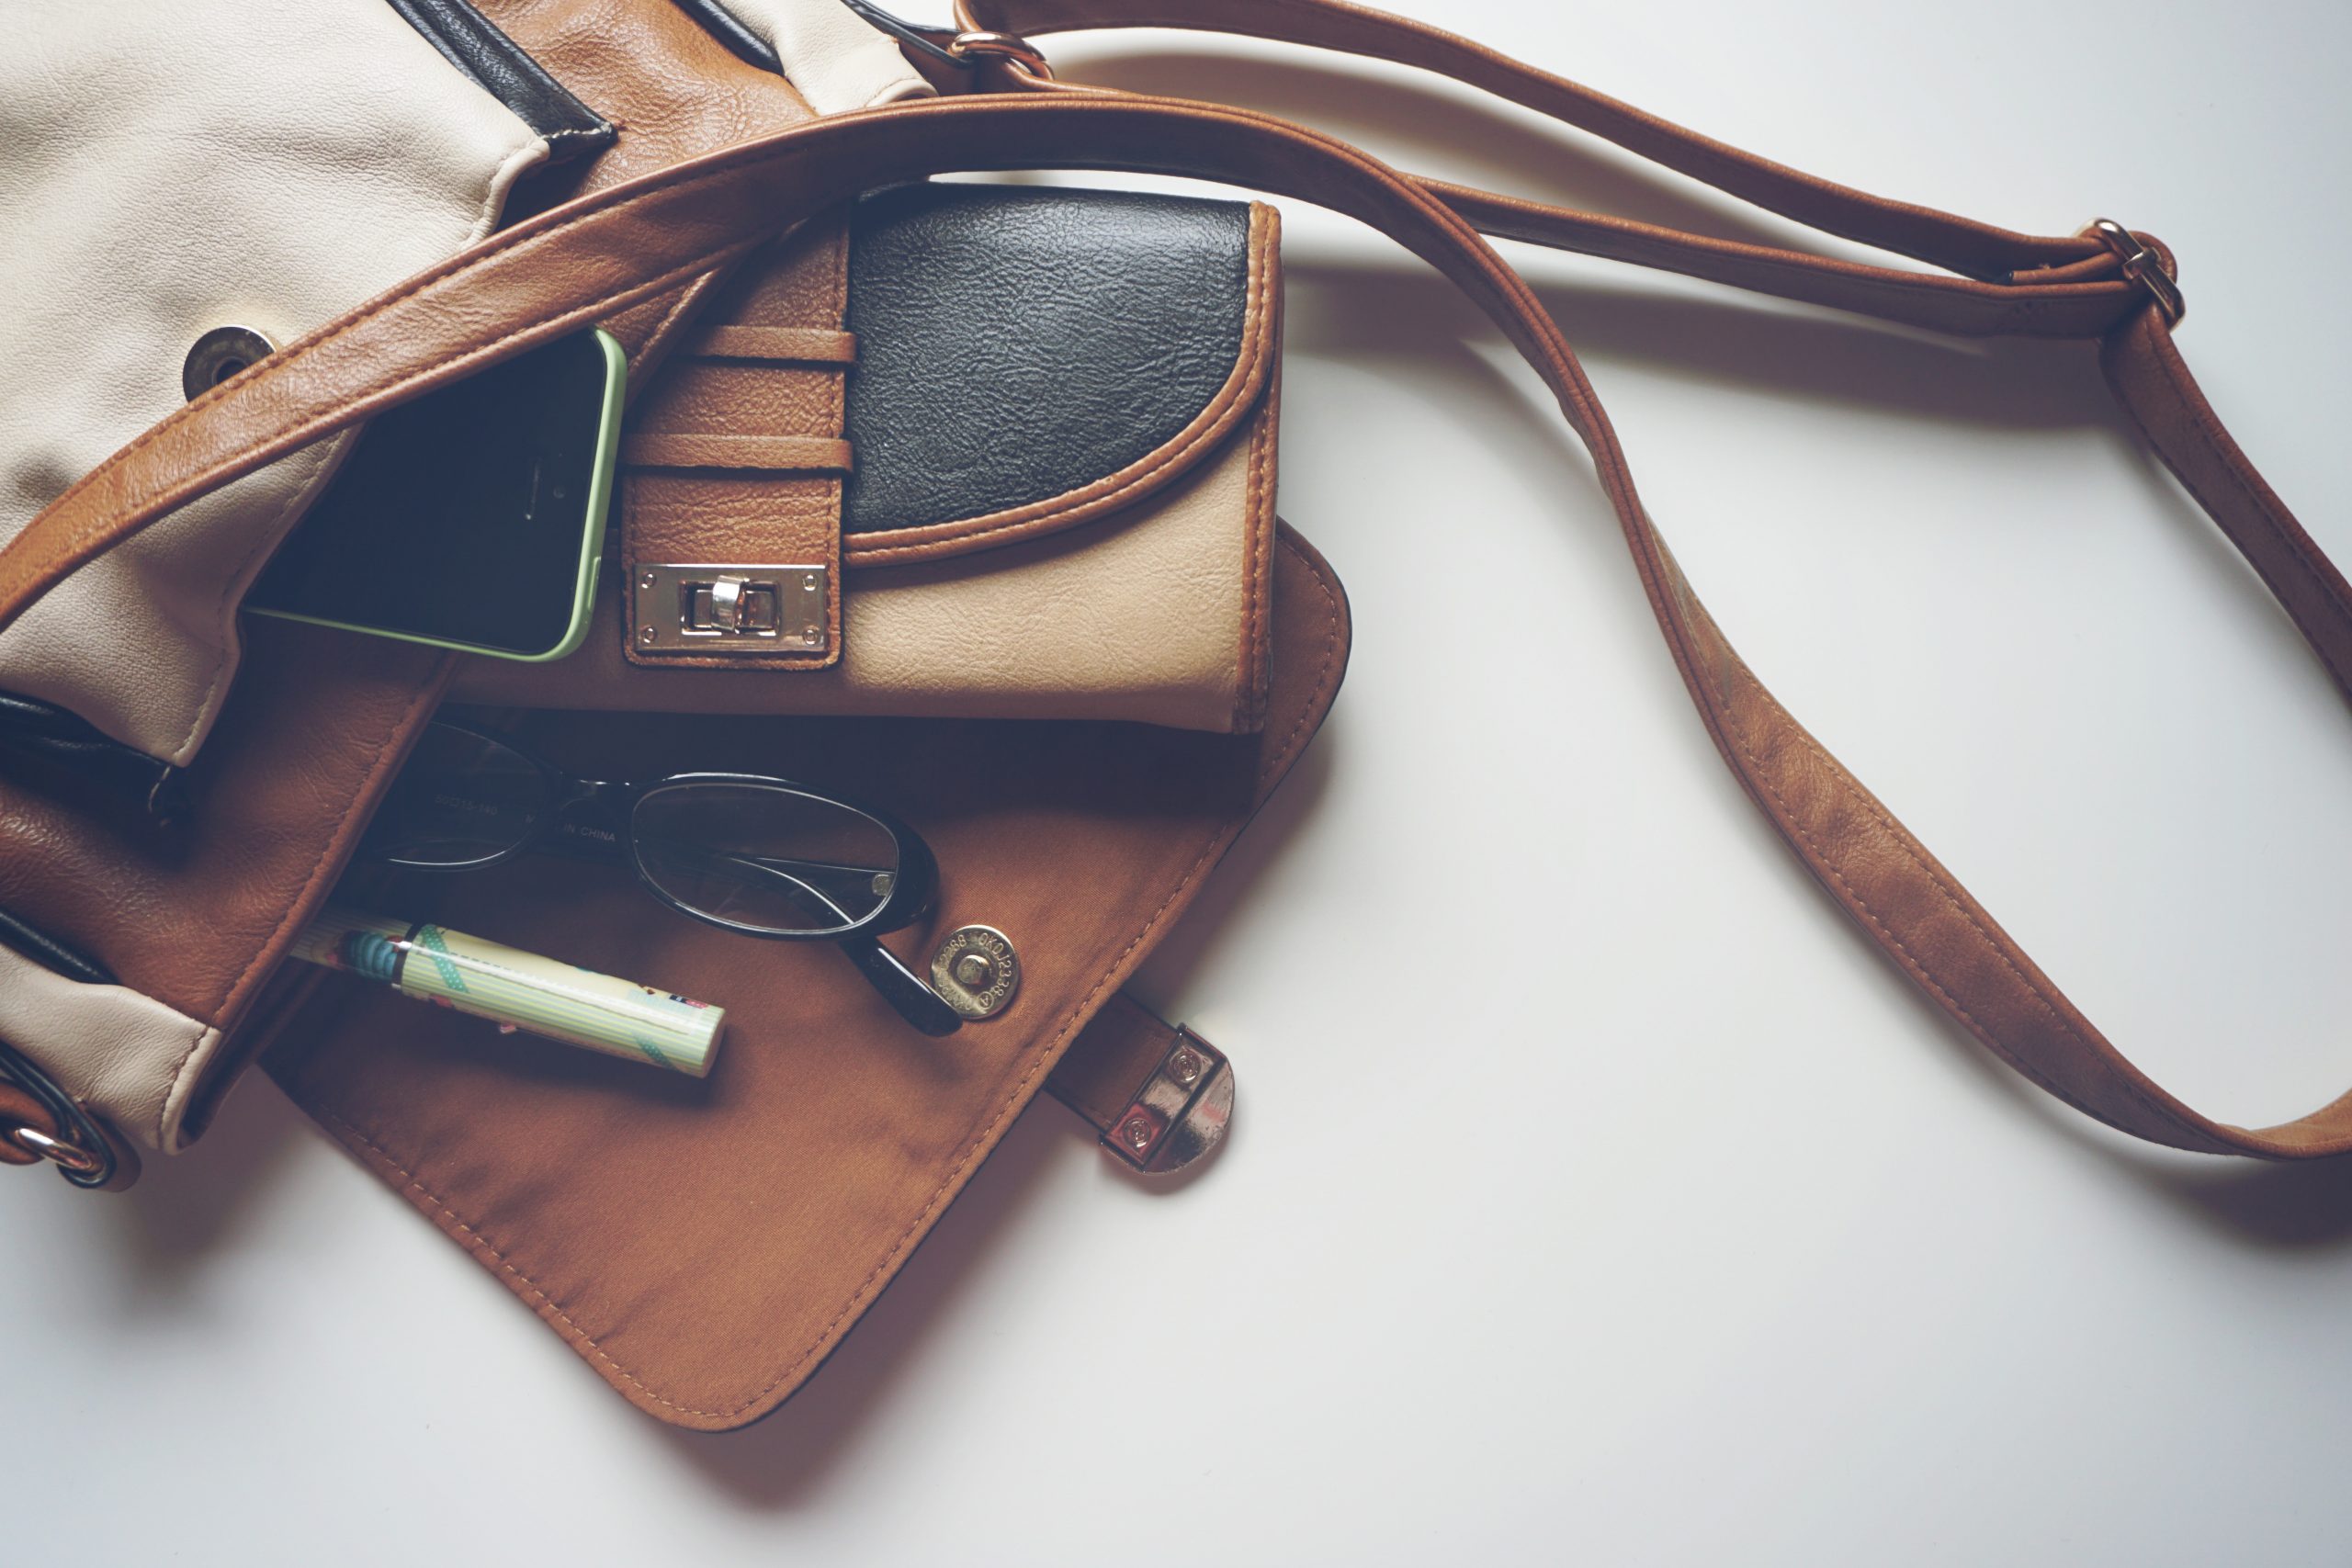 leather material, leather cross body bag, brown leather items, brown leather bag, brown leather bag with glasses